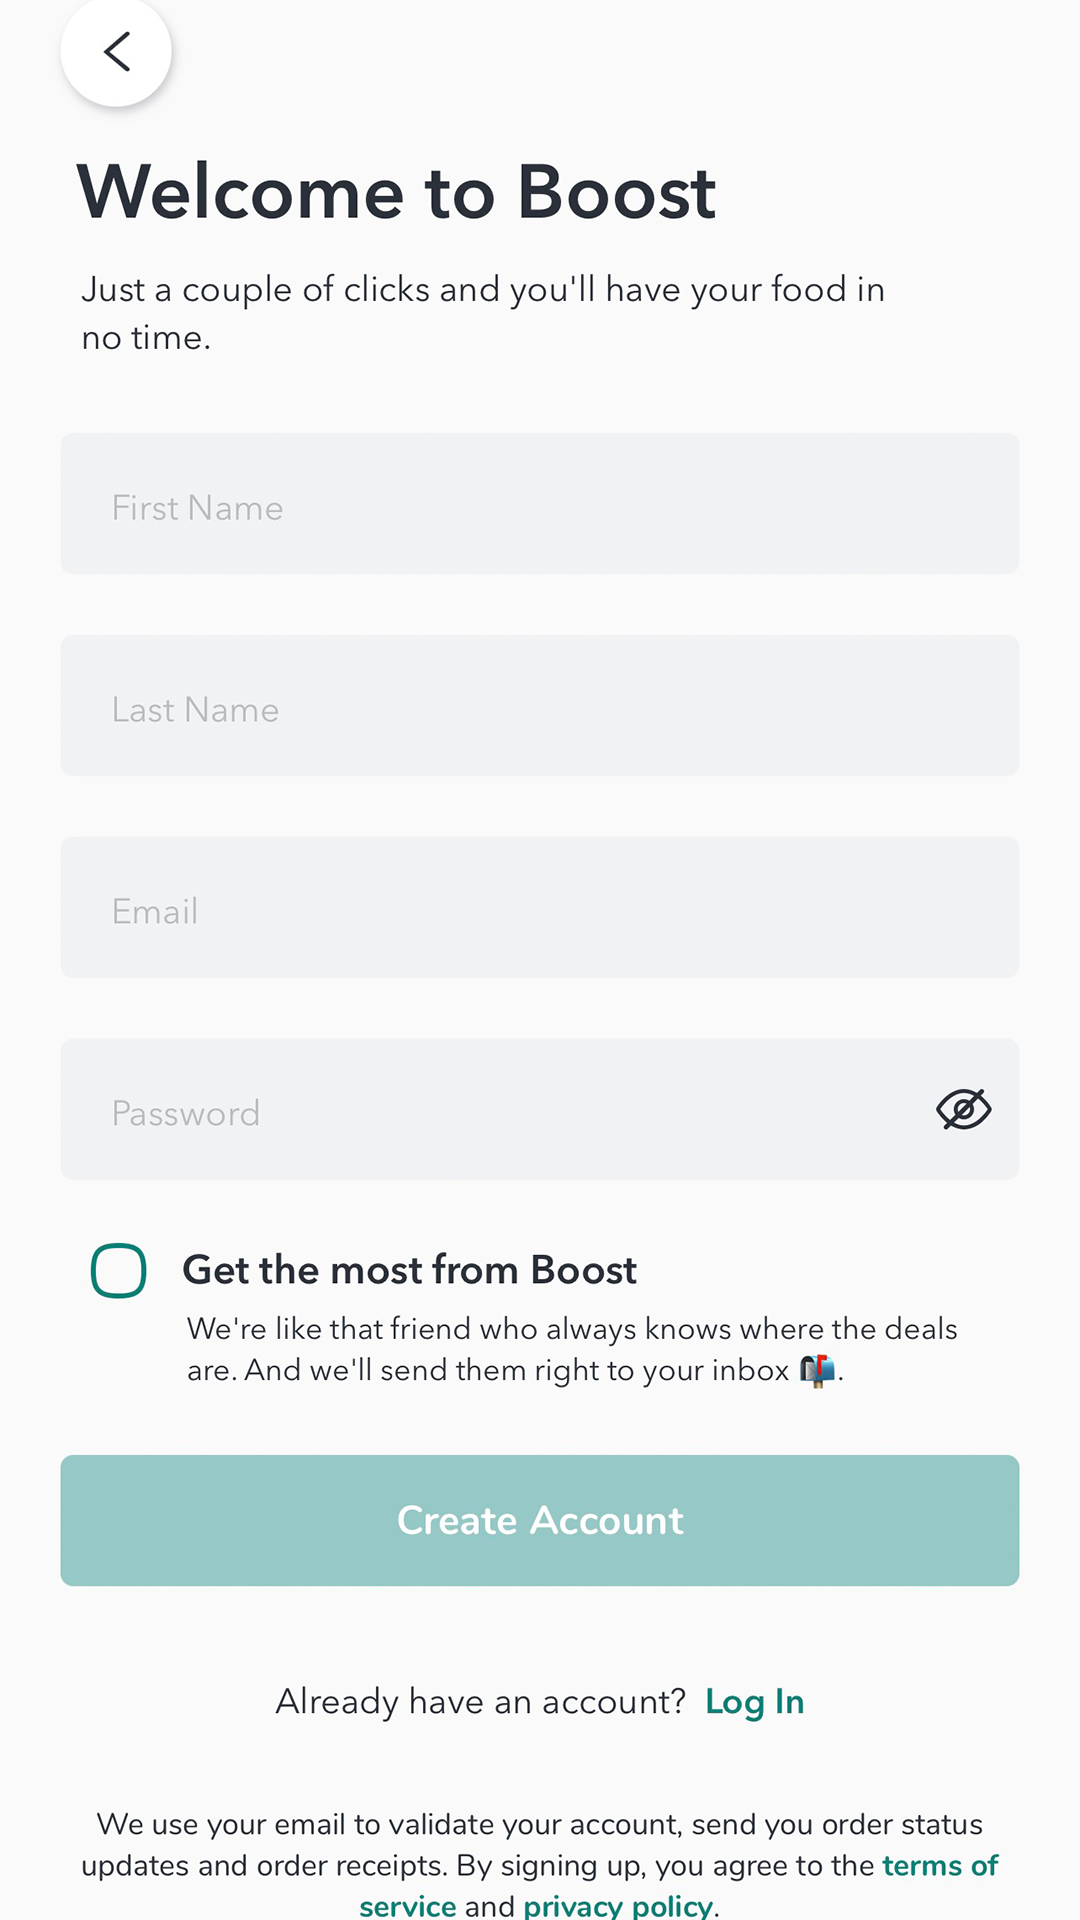 Create Account page screenshot, collecting name, email, and password.